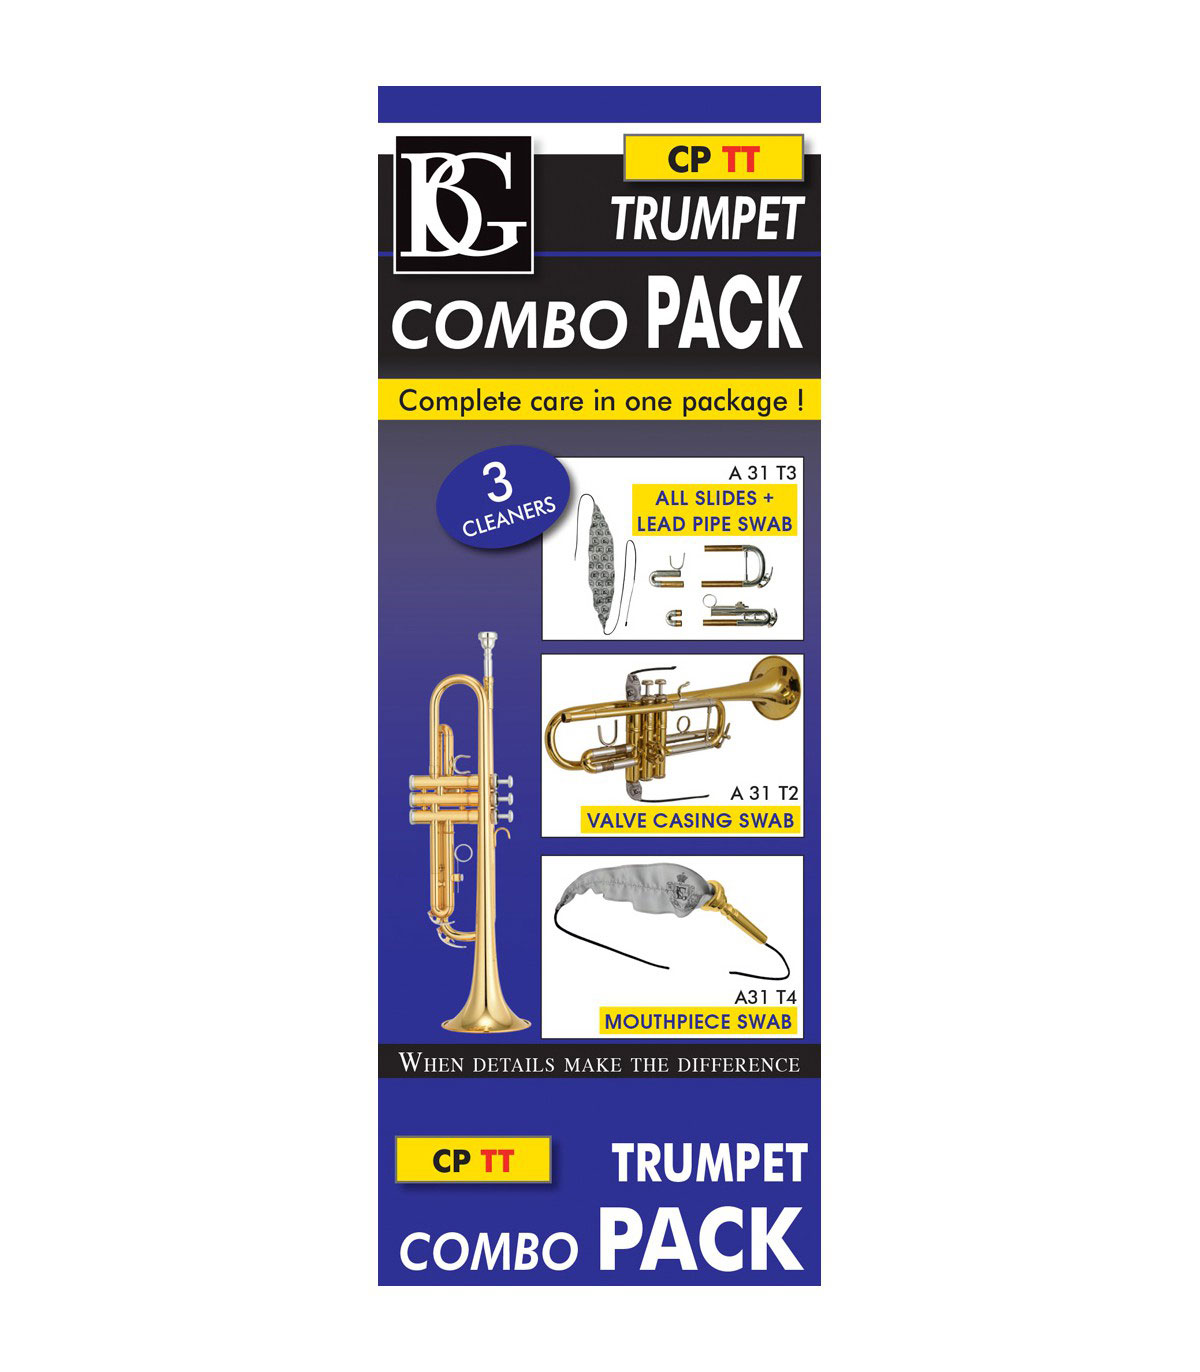 BG FRANCE TRUMPET COMBO PACK CARE KIT ( A31T2- A31T3 - A31T4 )